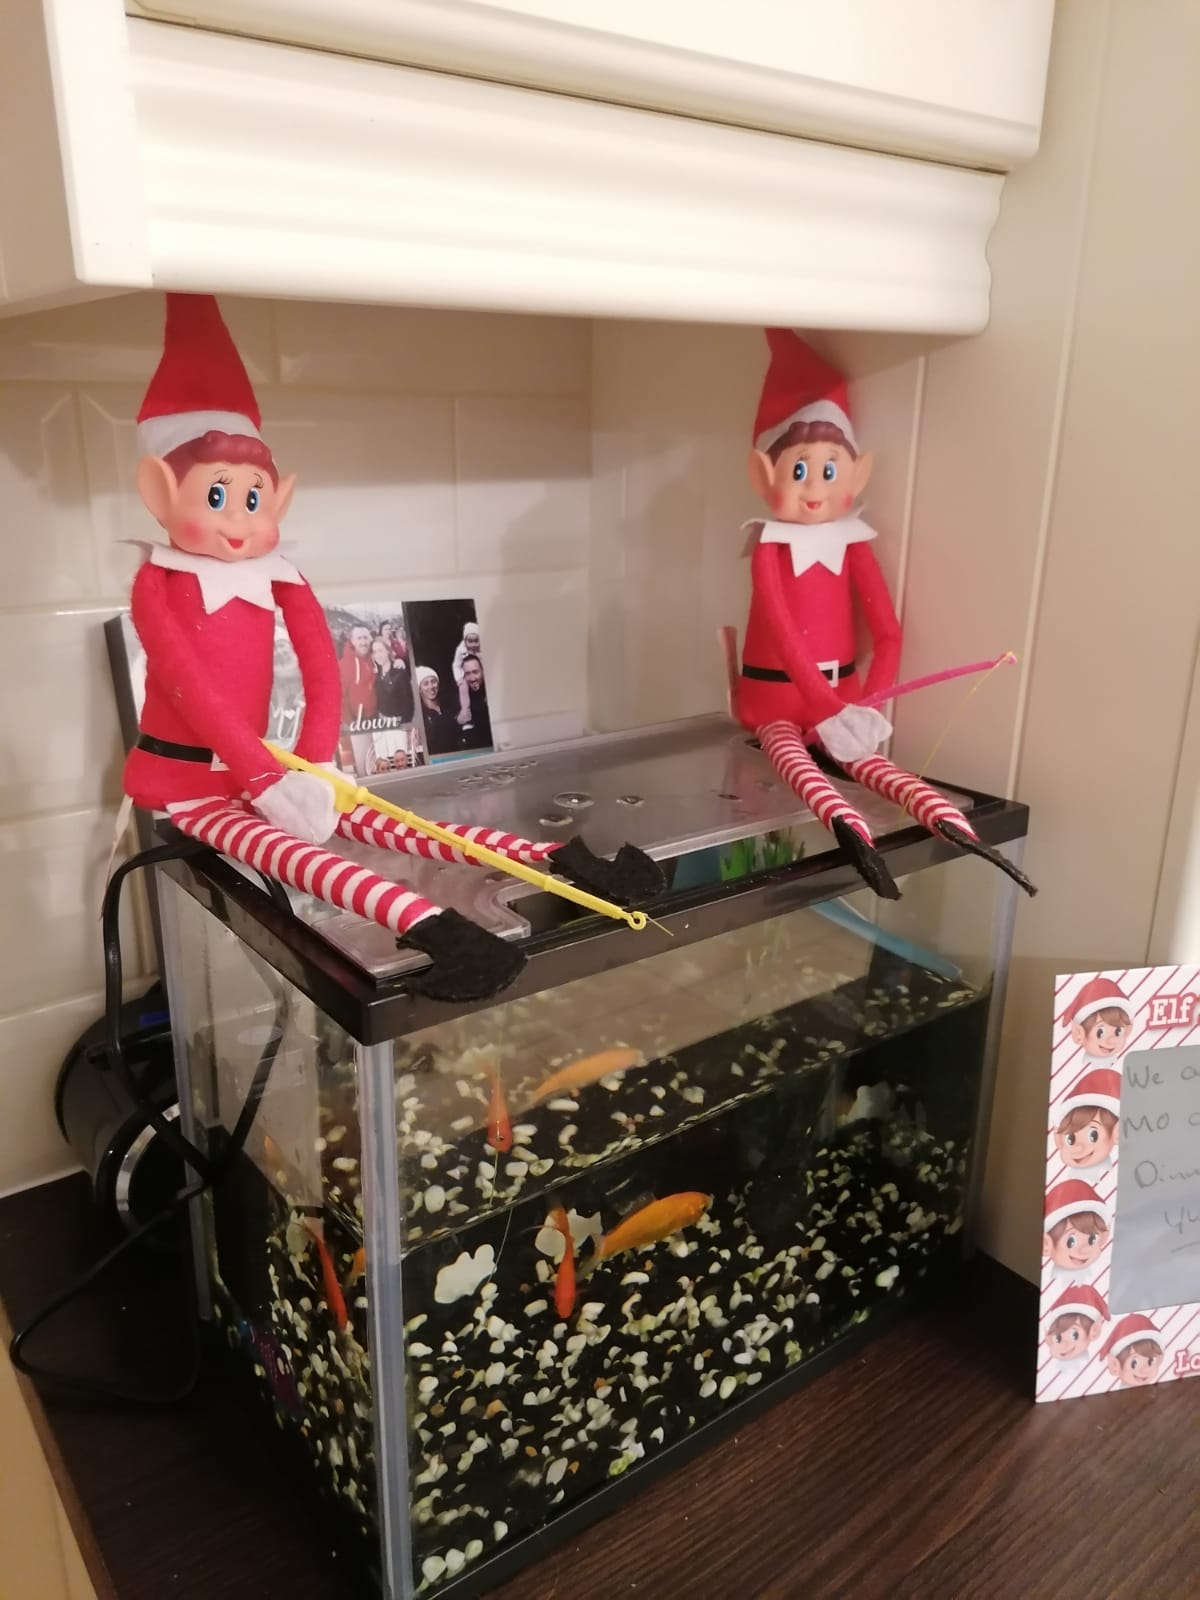 So What Has YOUR Elf Been Up To?